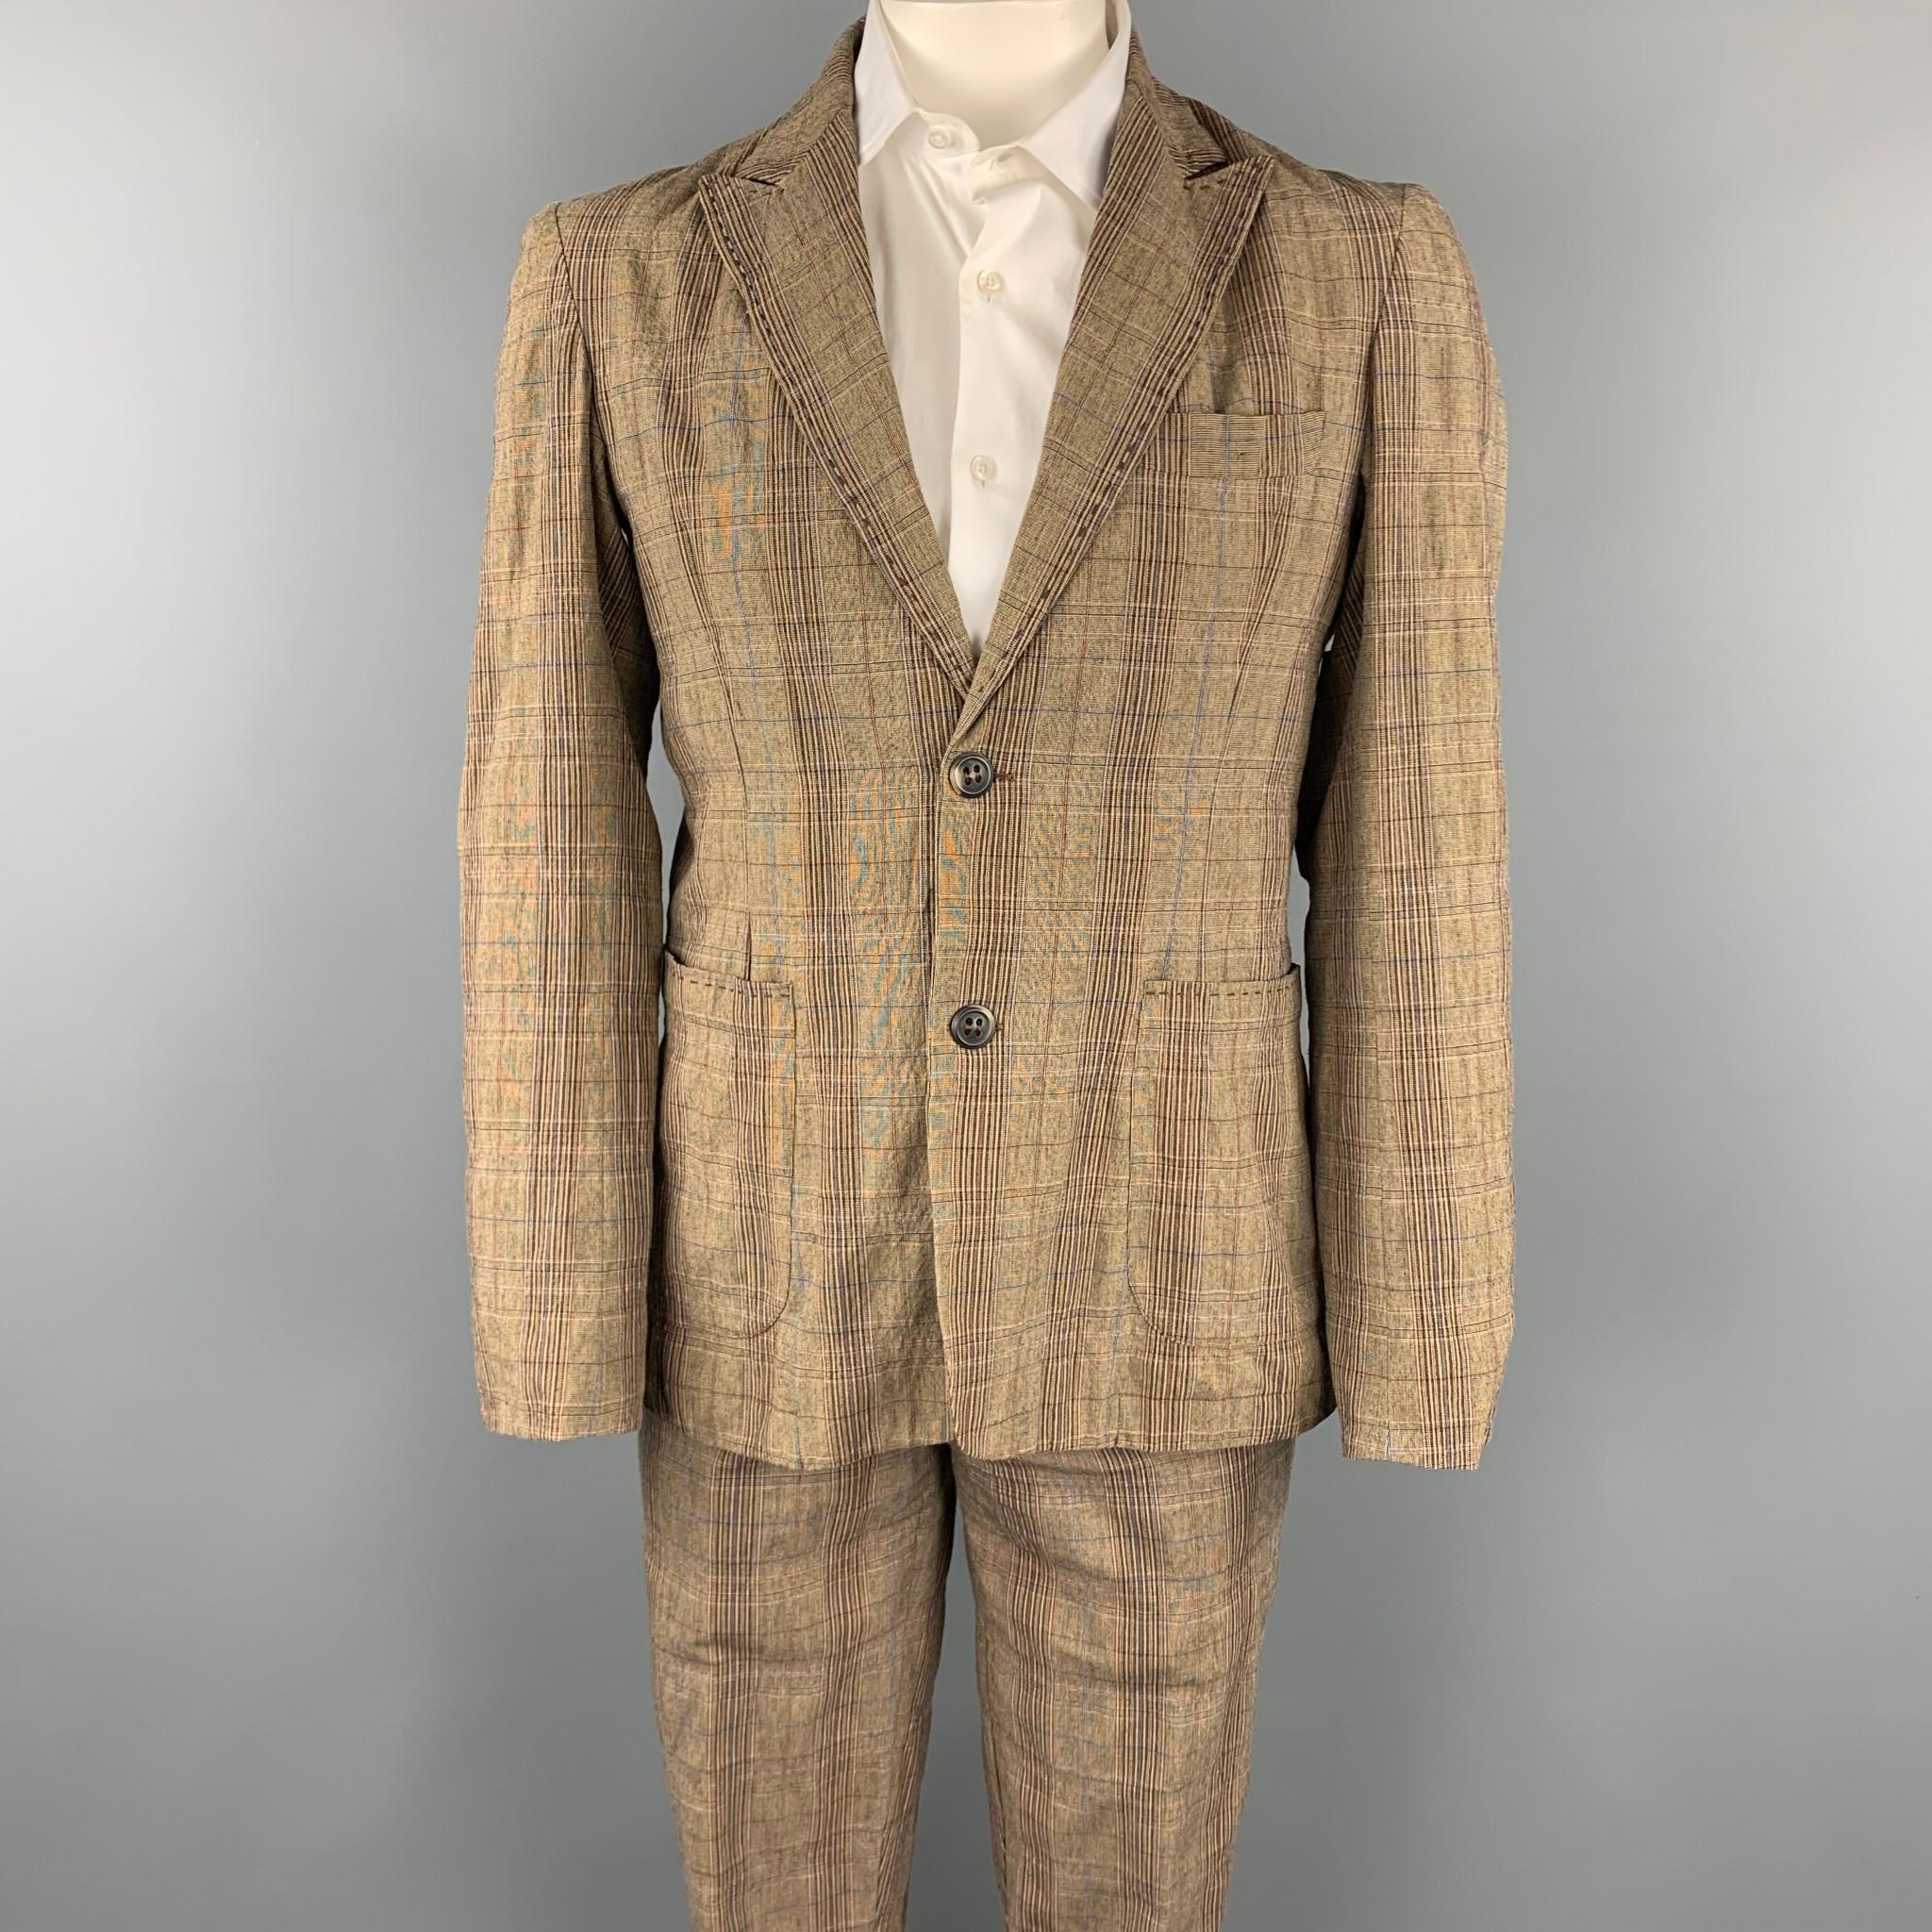 PODOLL suit comes in a brown plaid cotton blend and includes a single breasted, two button sport coat with a peak lapel and matching flat front trousers.

Good Pre-Owned Condition.
Marked: M

Measurements:

-Jacket
Shoulder: 18.5 in.
Chest: 38